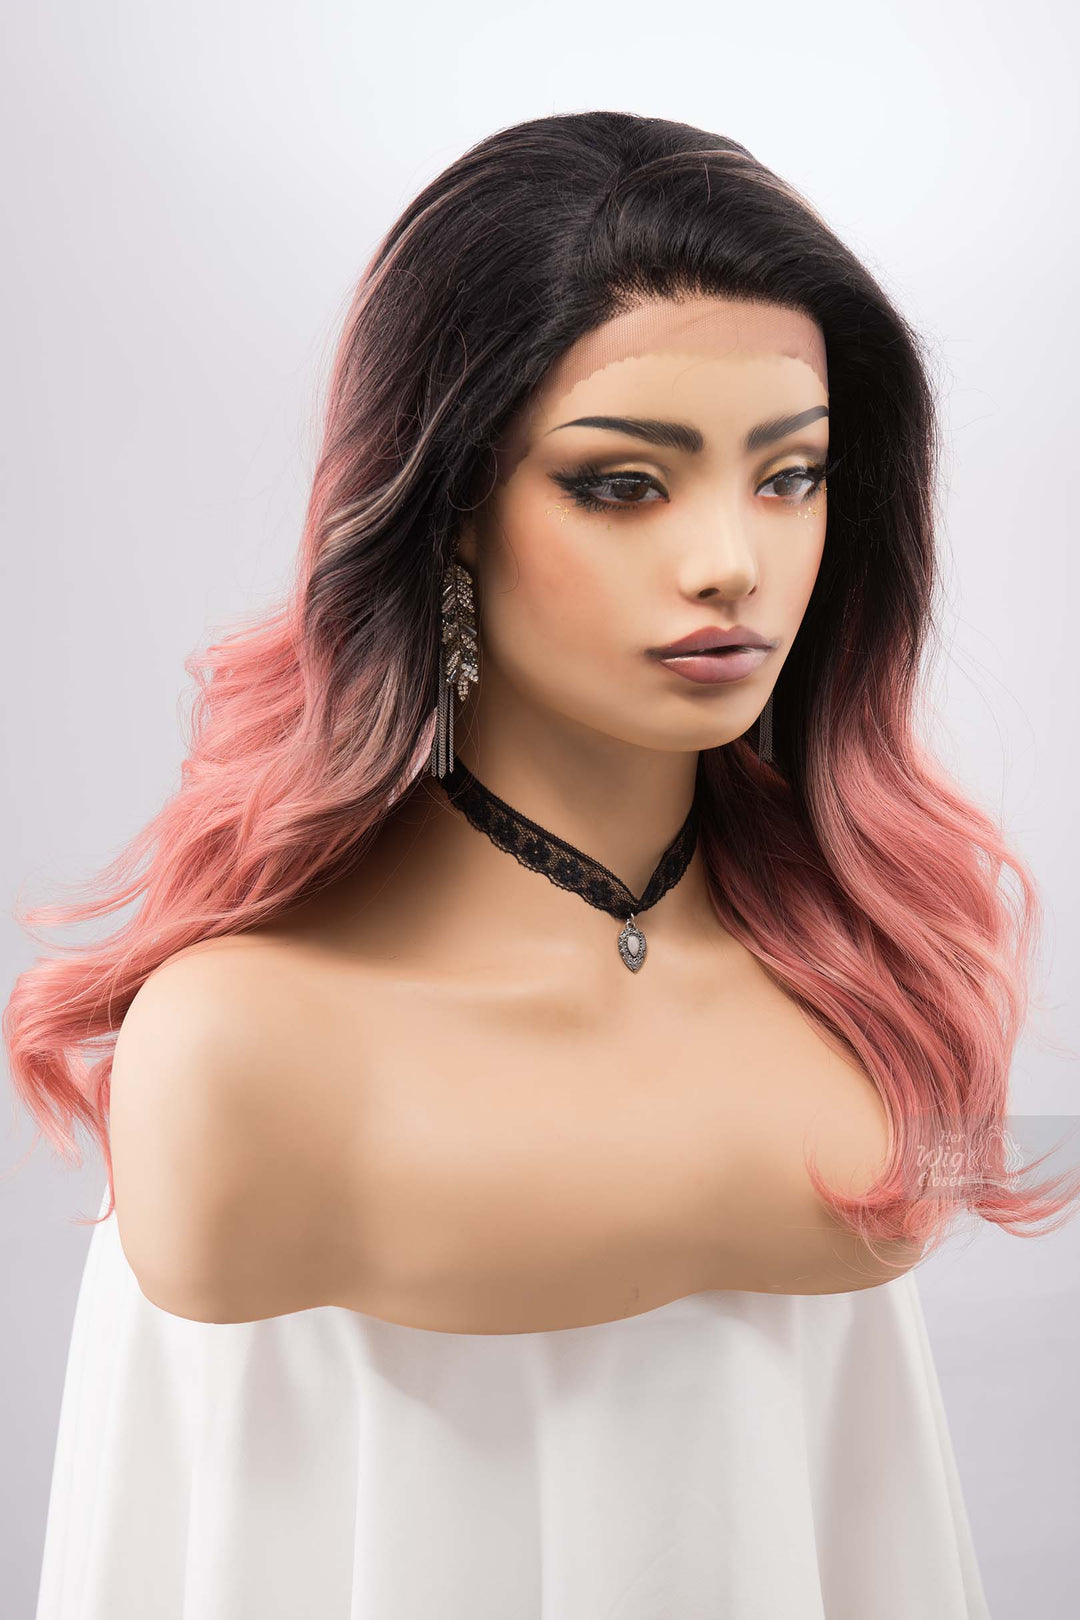 Ombre Peach Pink Wig Blush Pink Lace Front Wig with Dark Roots Free Part Lace Front Wig for Hair Loss Cosplay Wig Party Hair Posey